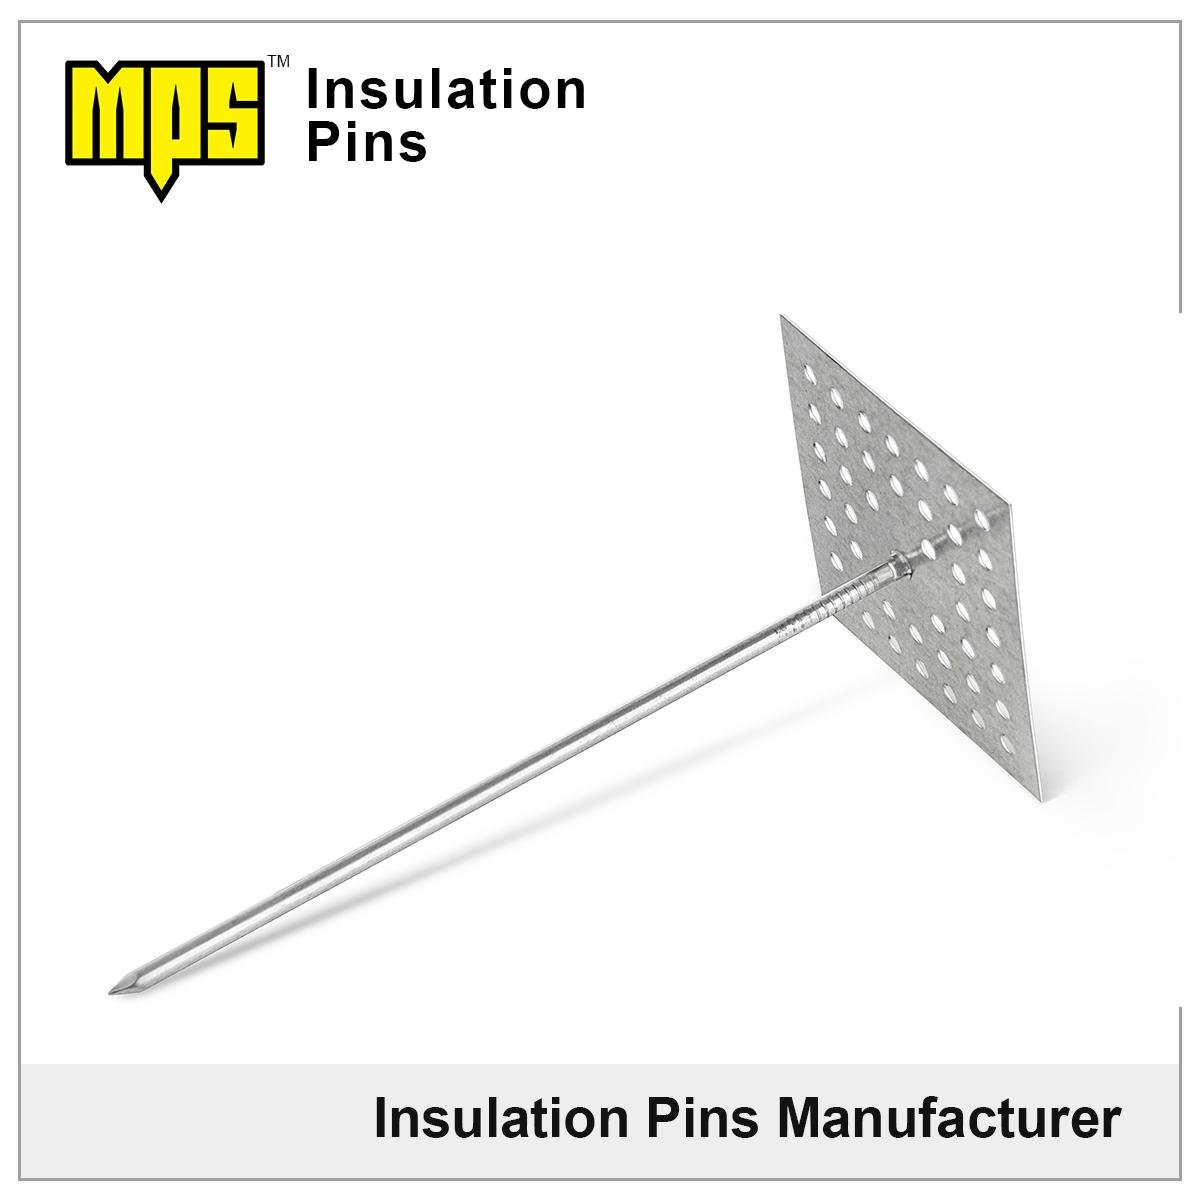 12Gauge 1-5/8" long 50*50mm perforated base insulation pins 2